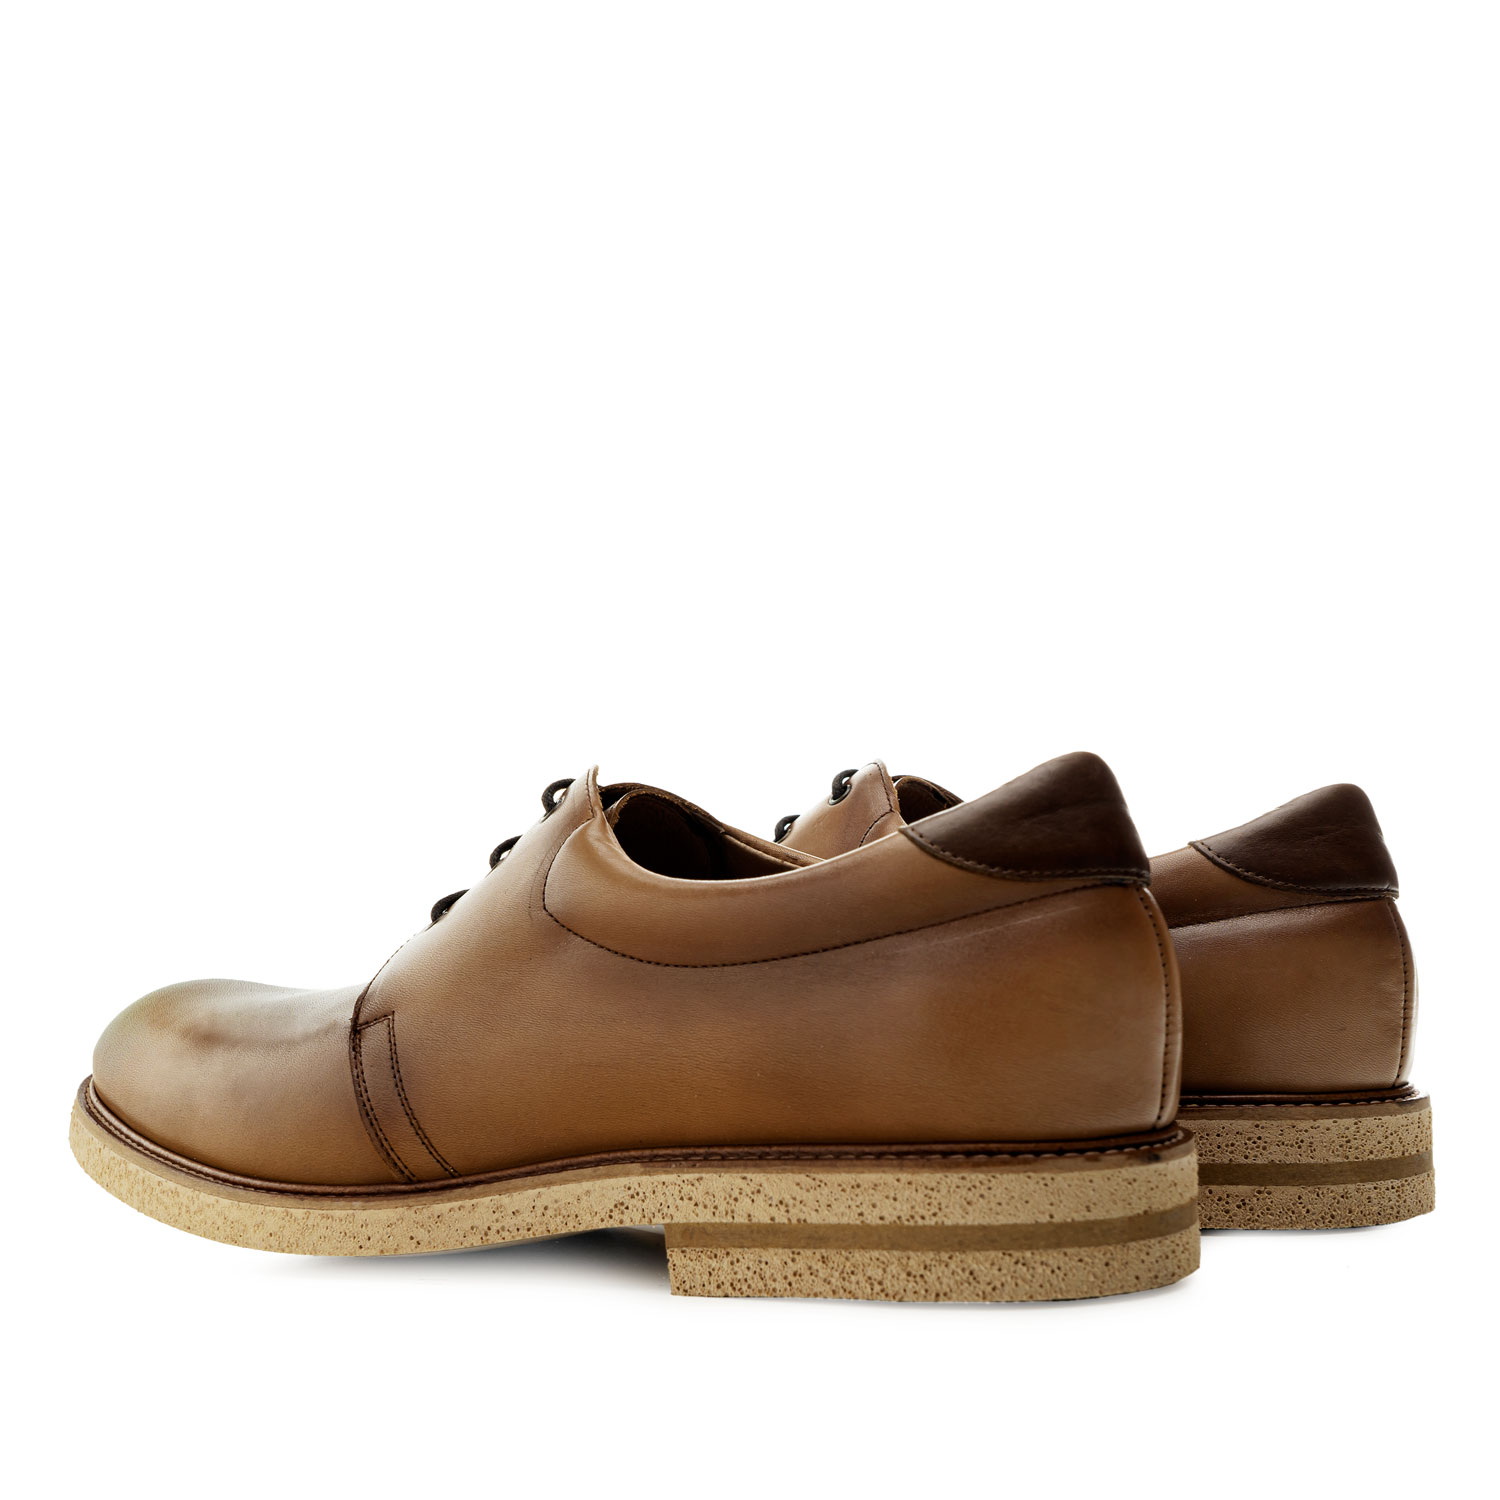 Men's Dress Shoes in Tan Leather 